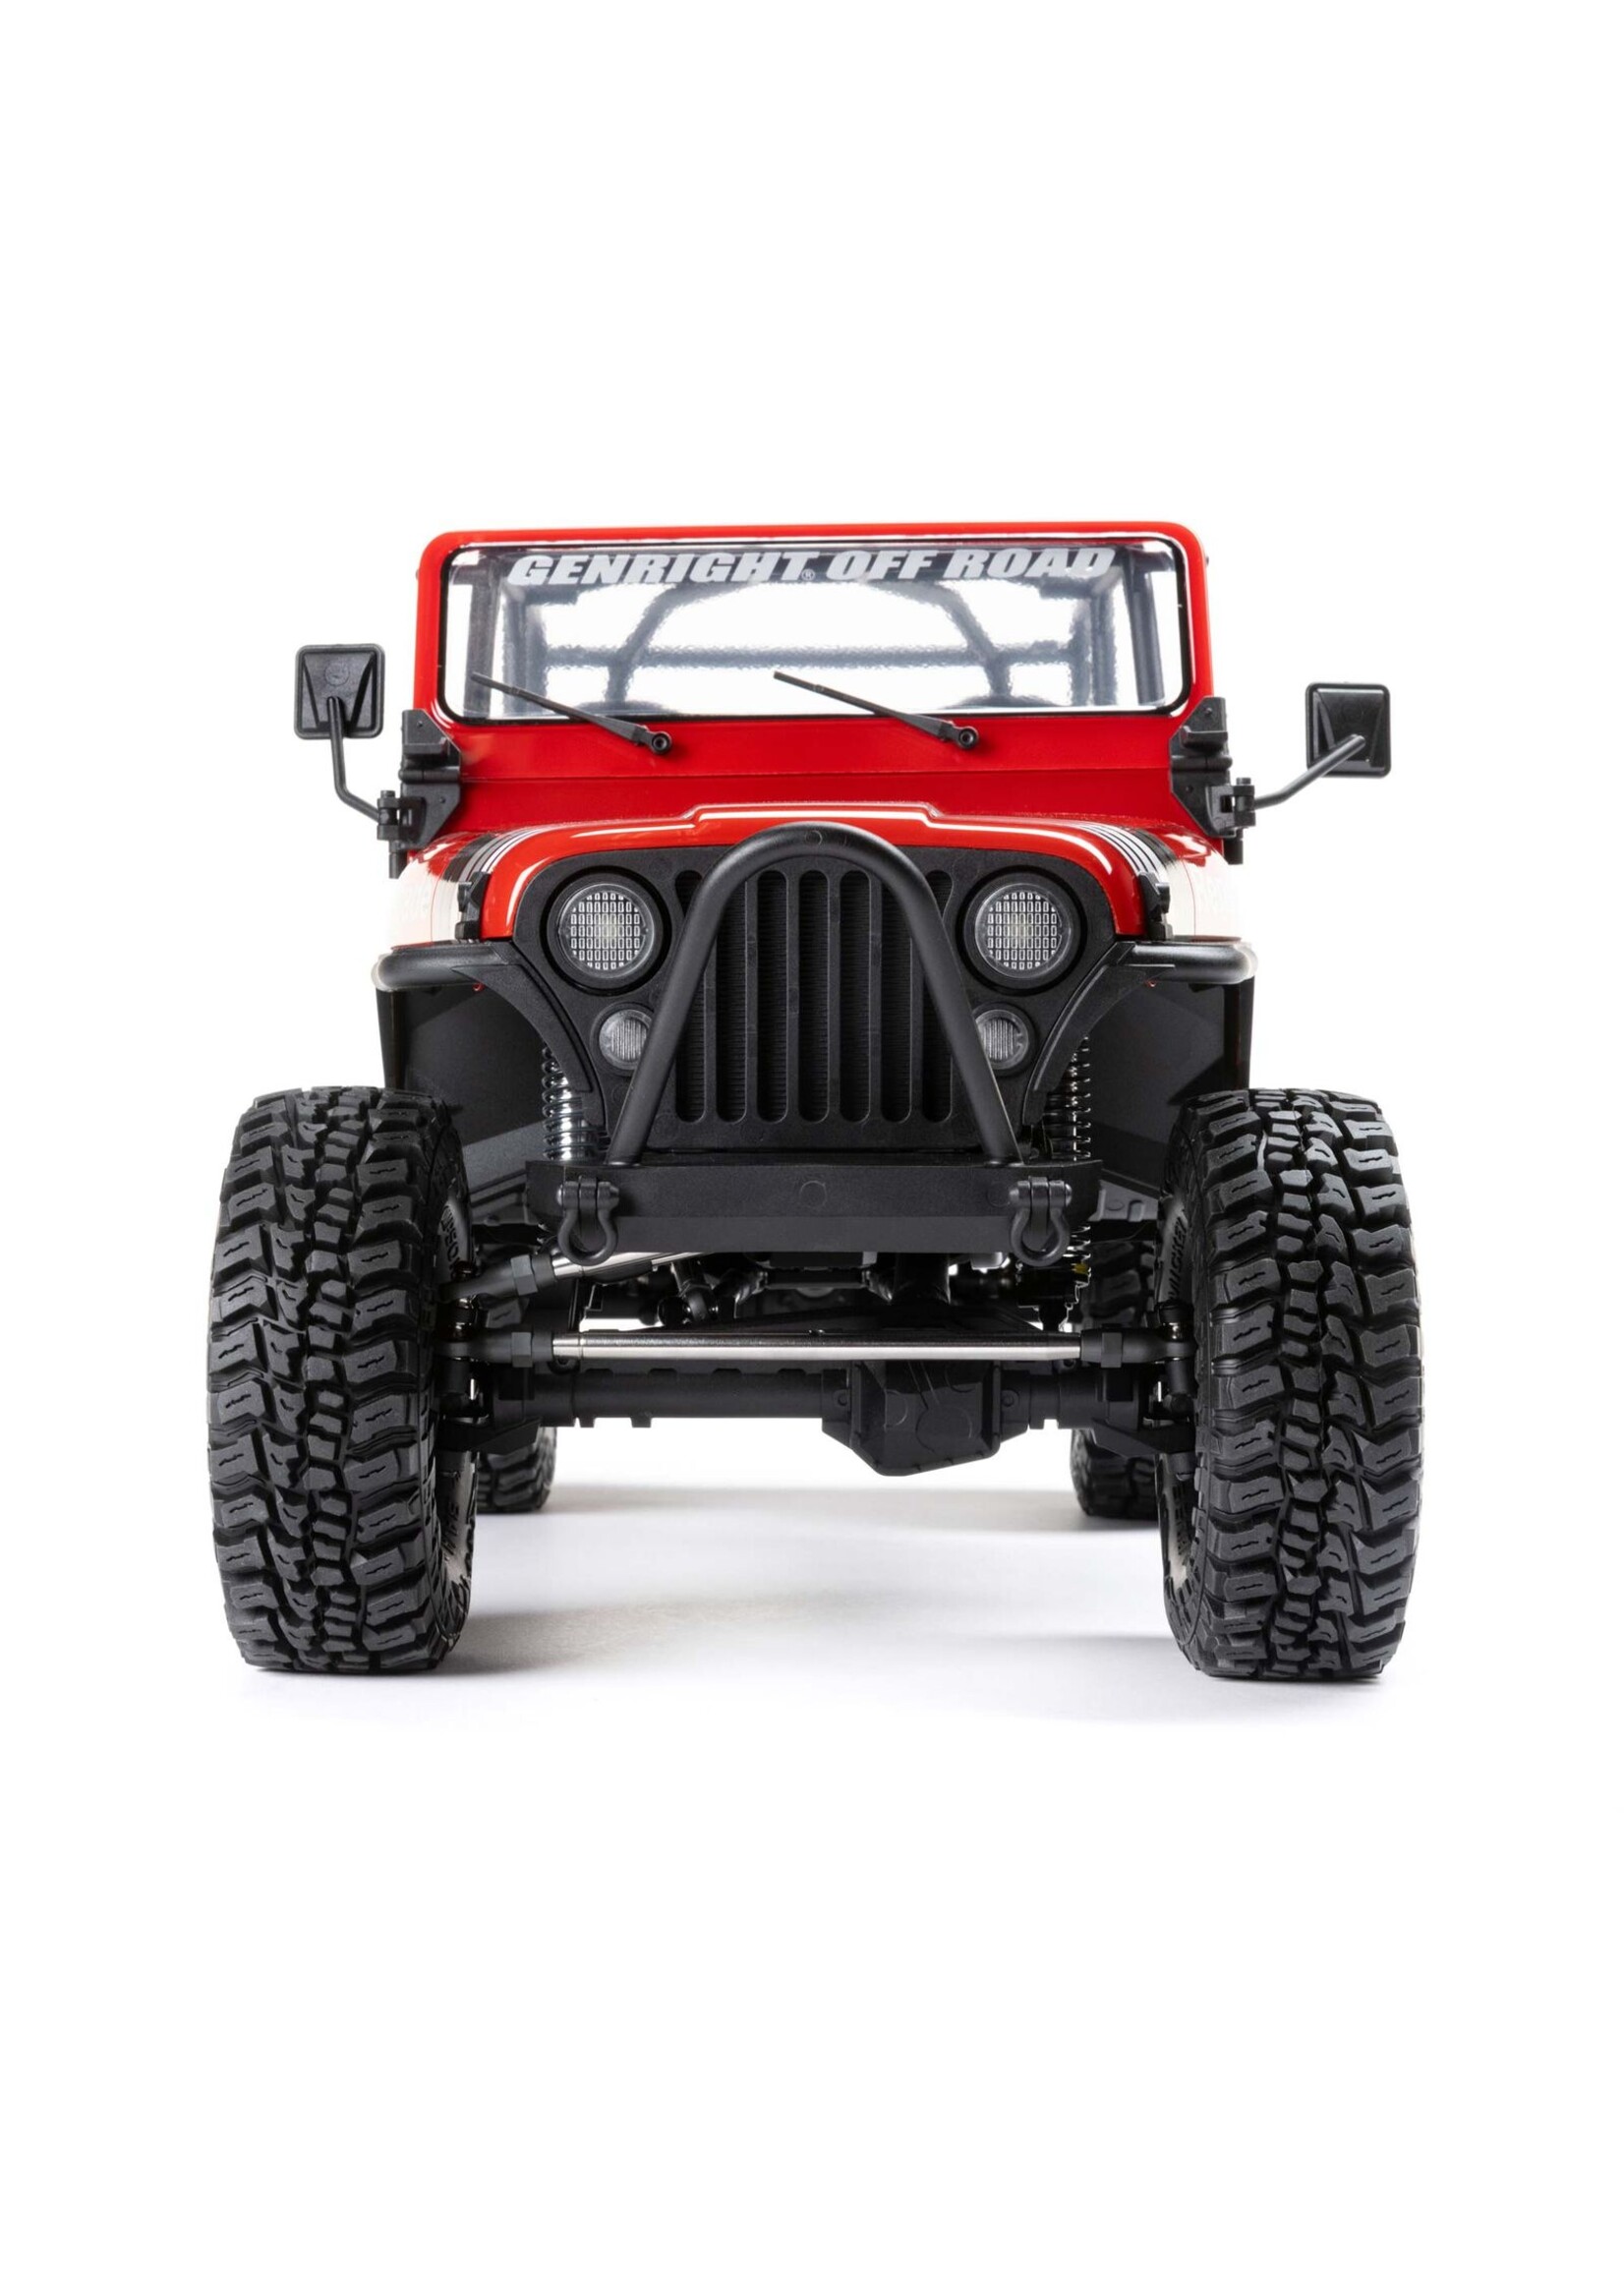 Axial AXI 03008T1 - SCX10 III Jeep CJ-7 Brushed, RTR - Red